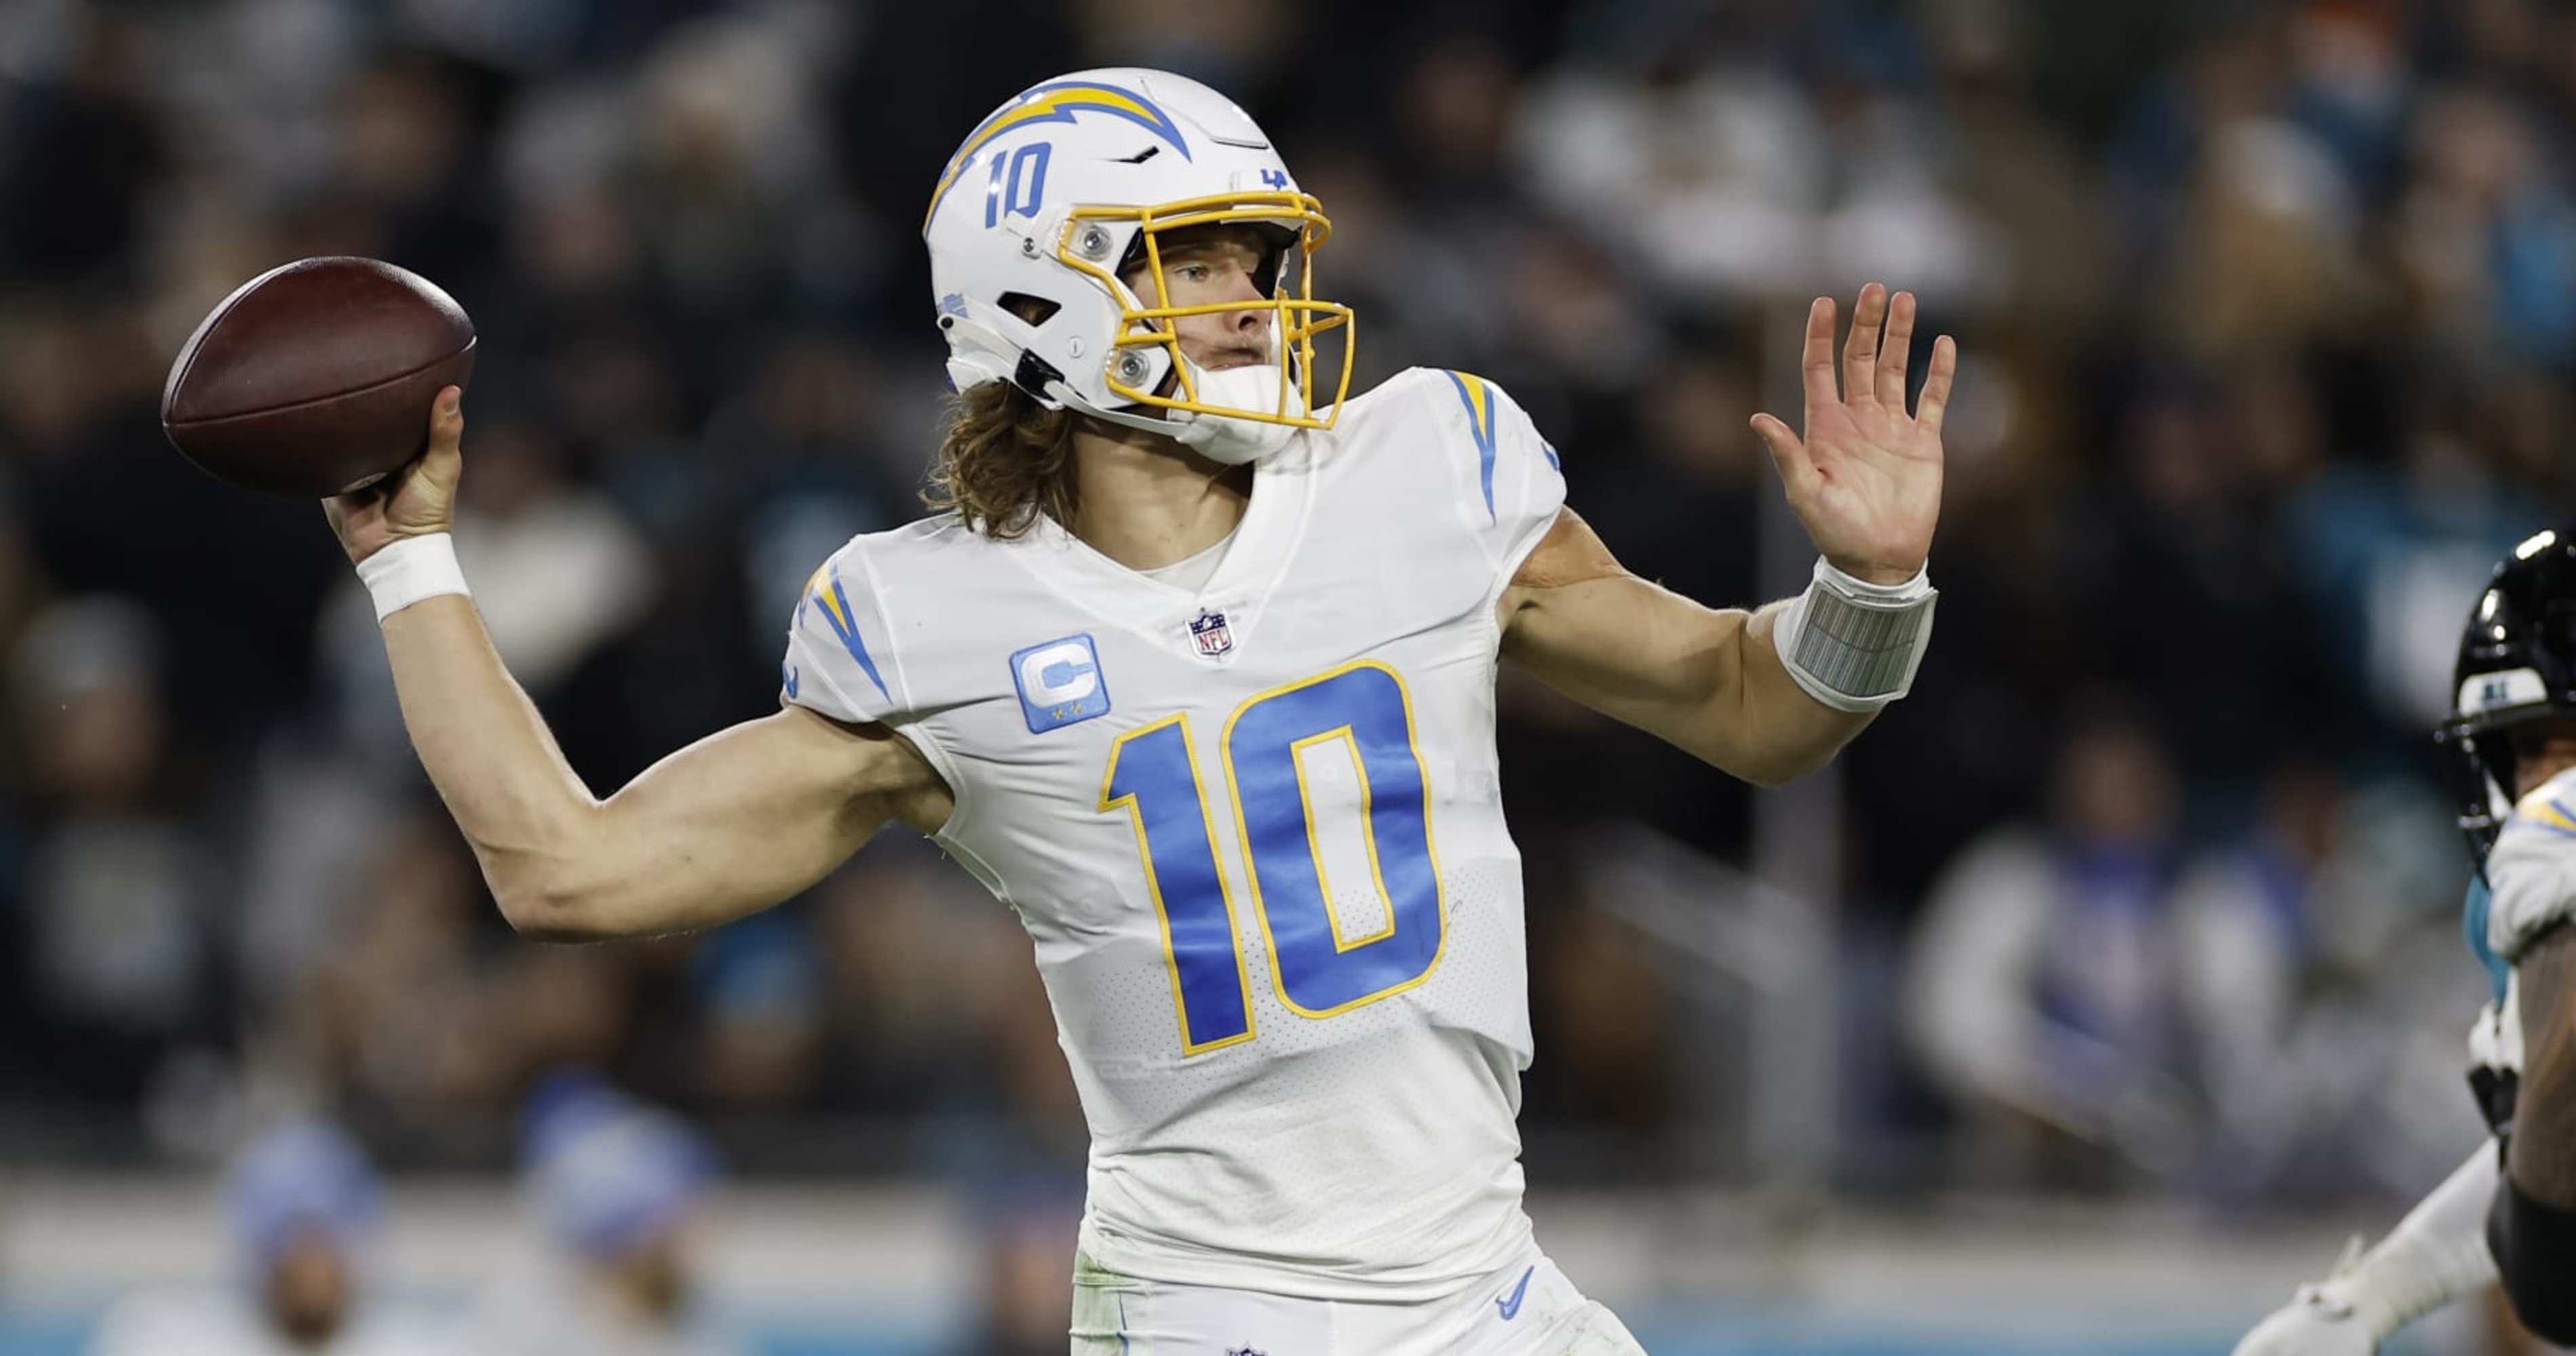 2023 Los Angeles Chargers Schedule Full Listing of Dates, Times and TV